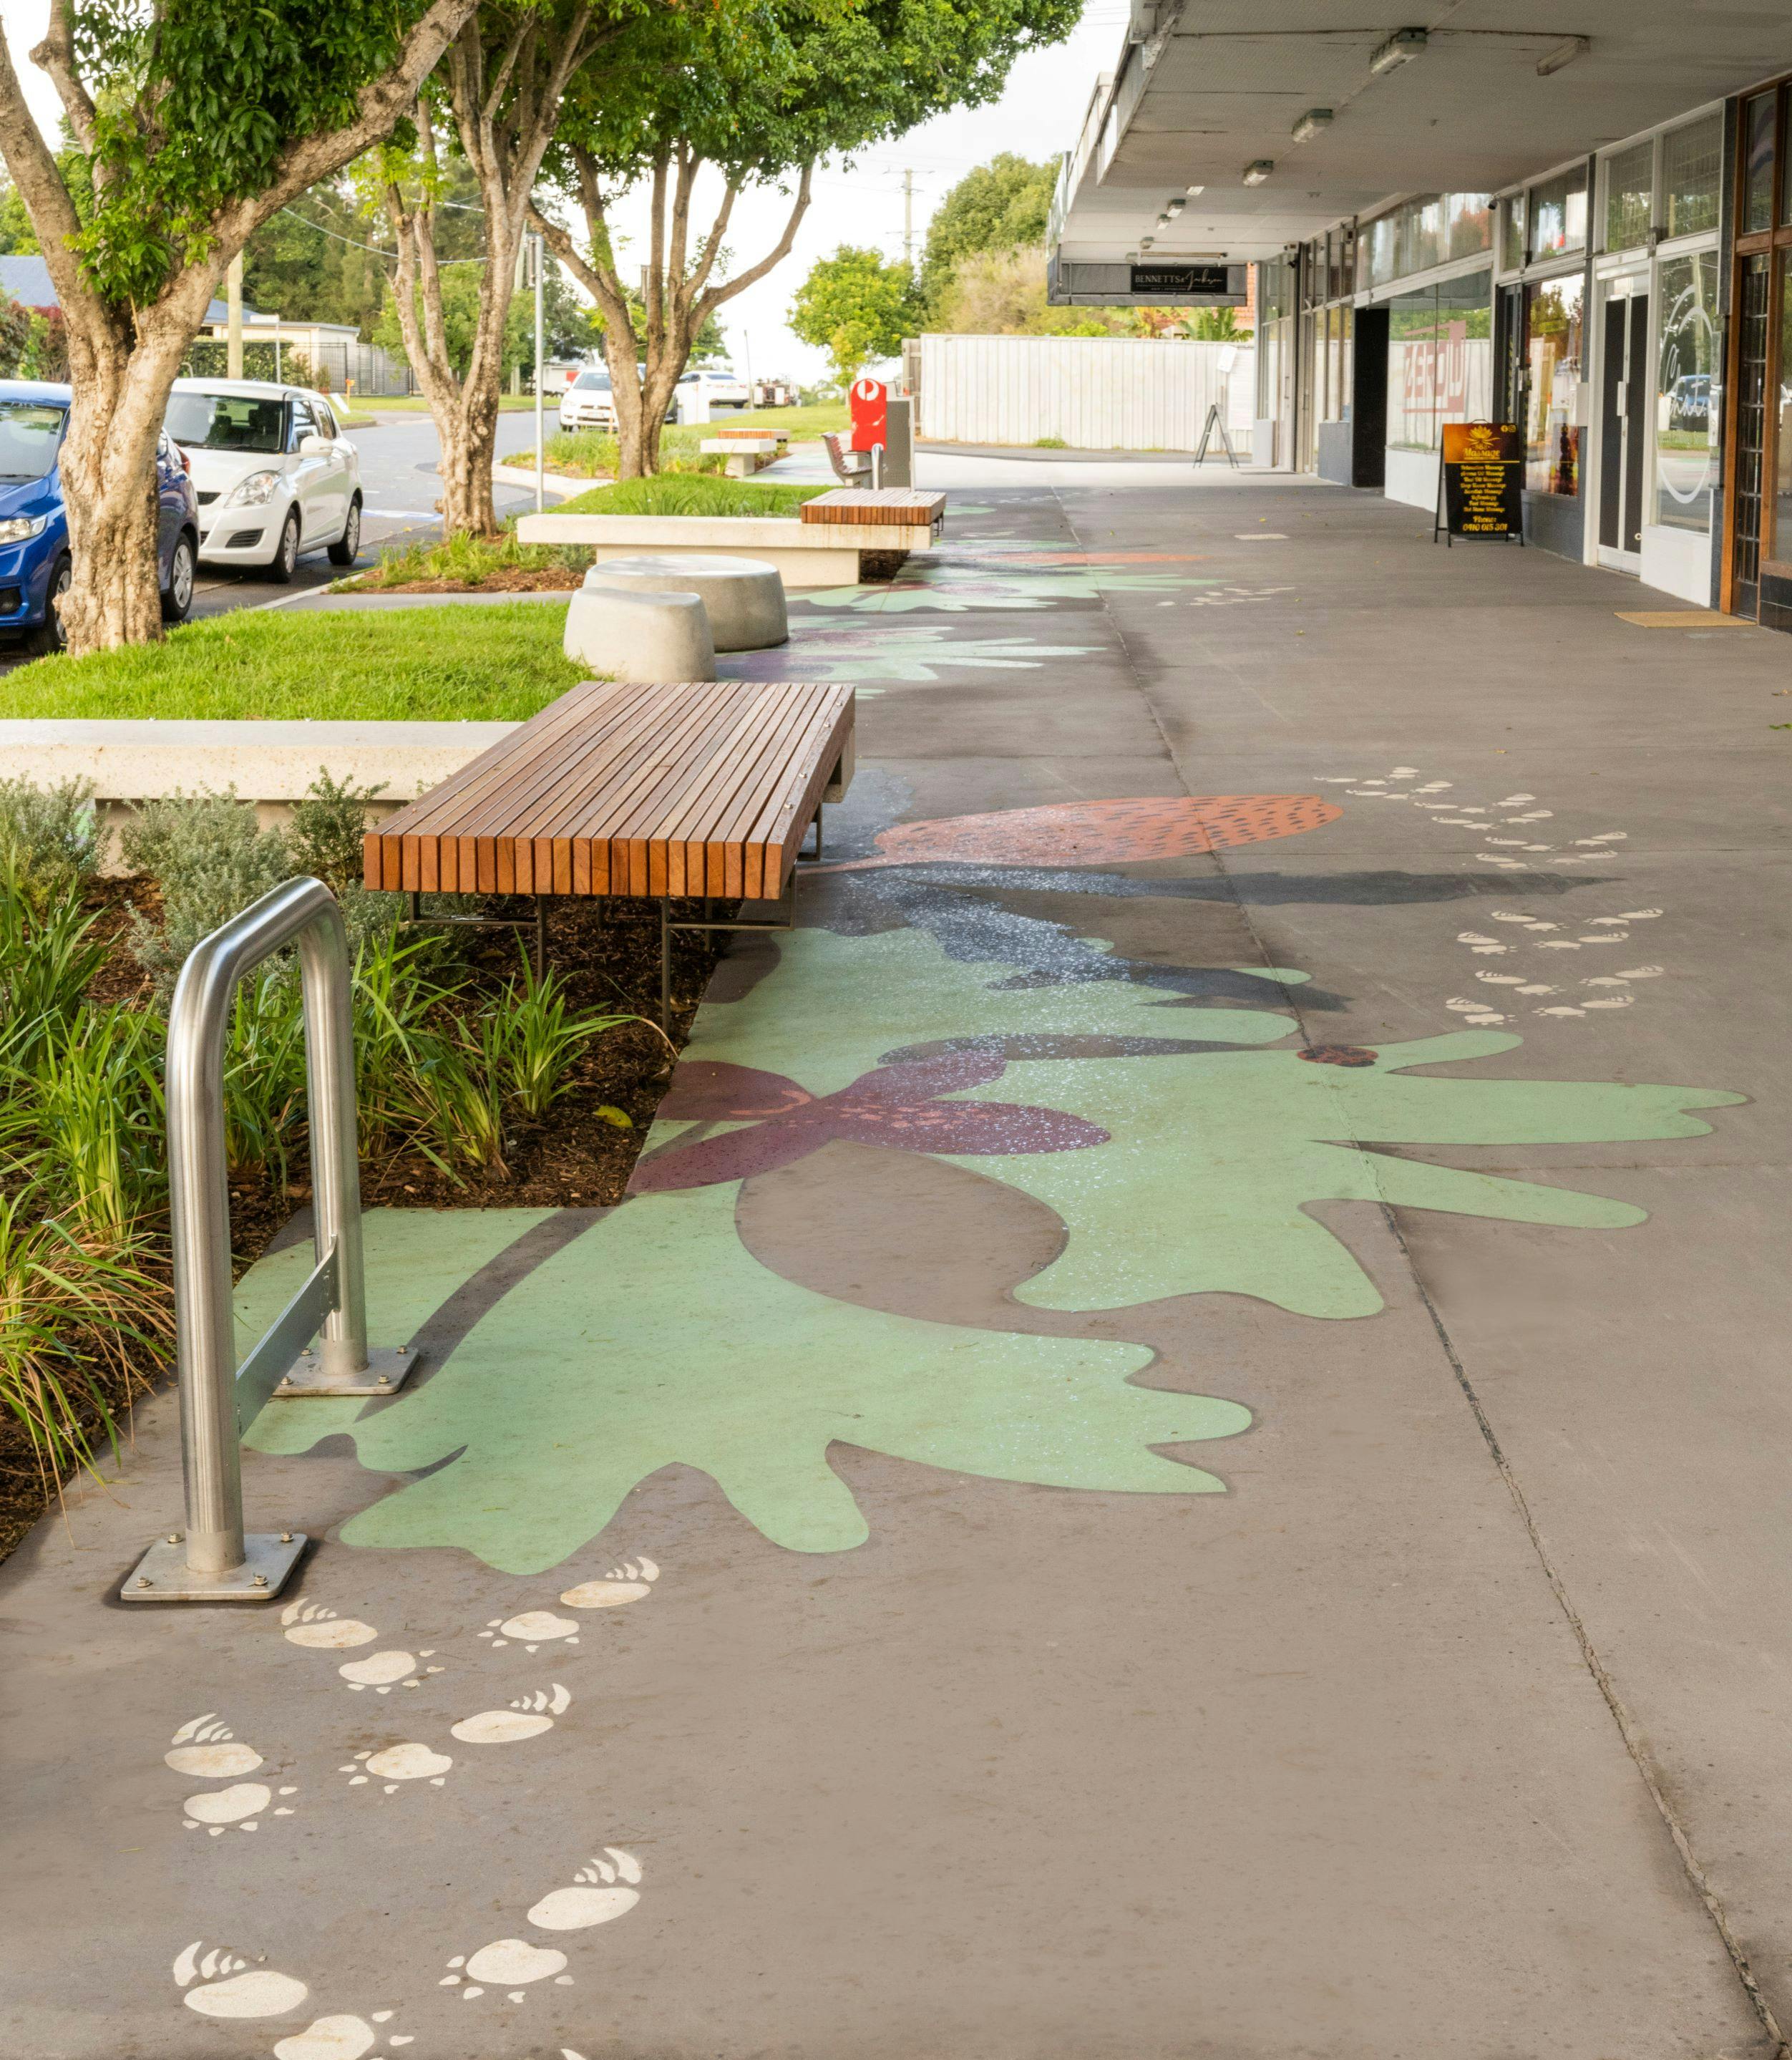 Lumley St looking east at upgraded footpath with new seating areas incorporating custom seating, turf and planting beds and colourful 'Echidna Magic' pavement designs.